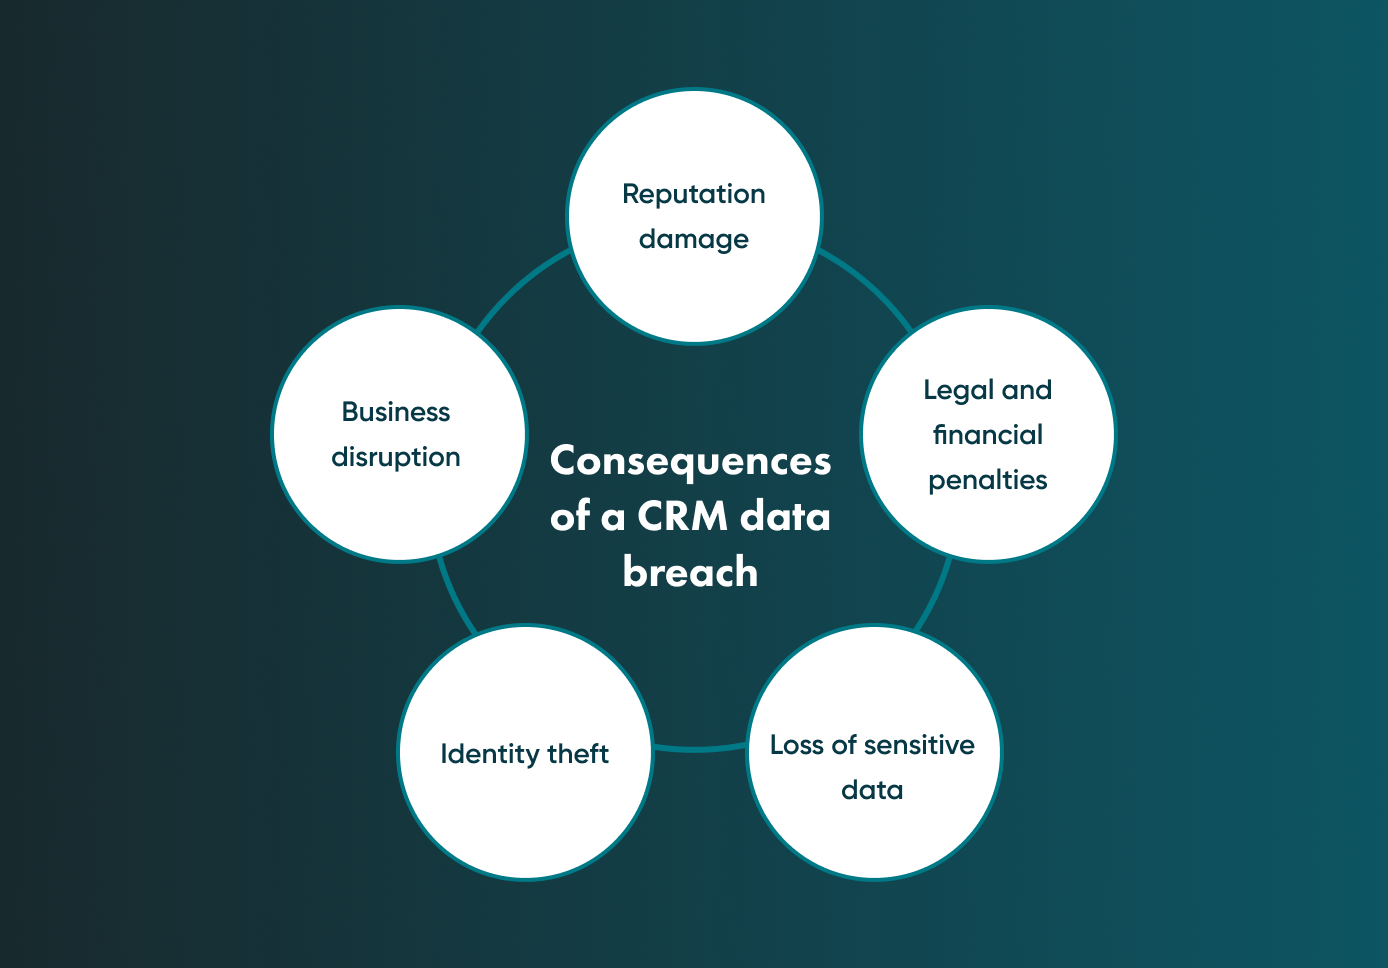 If you don’t pay much attention to protecting customer information, your business will be threatened. Please be aware of the consequences of a data breach. 